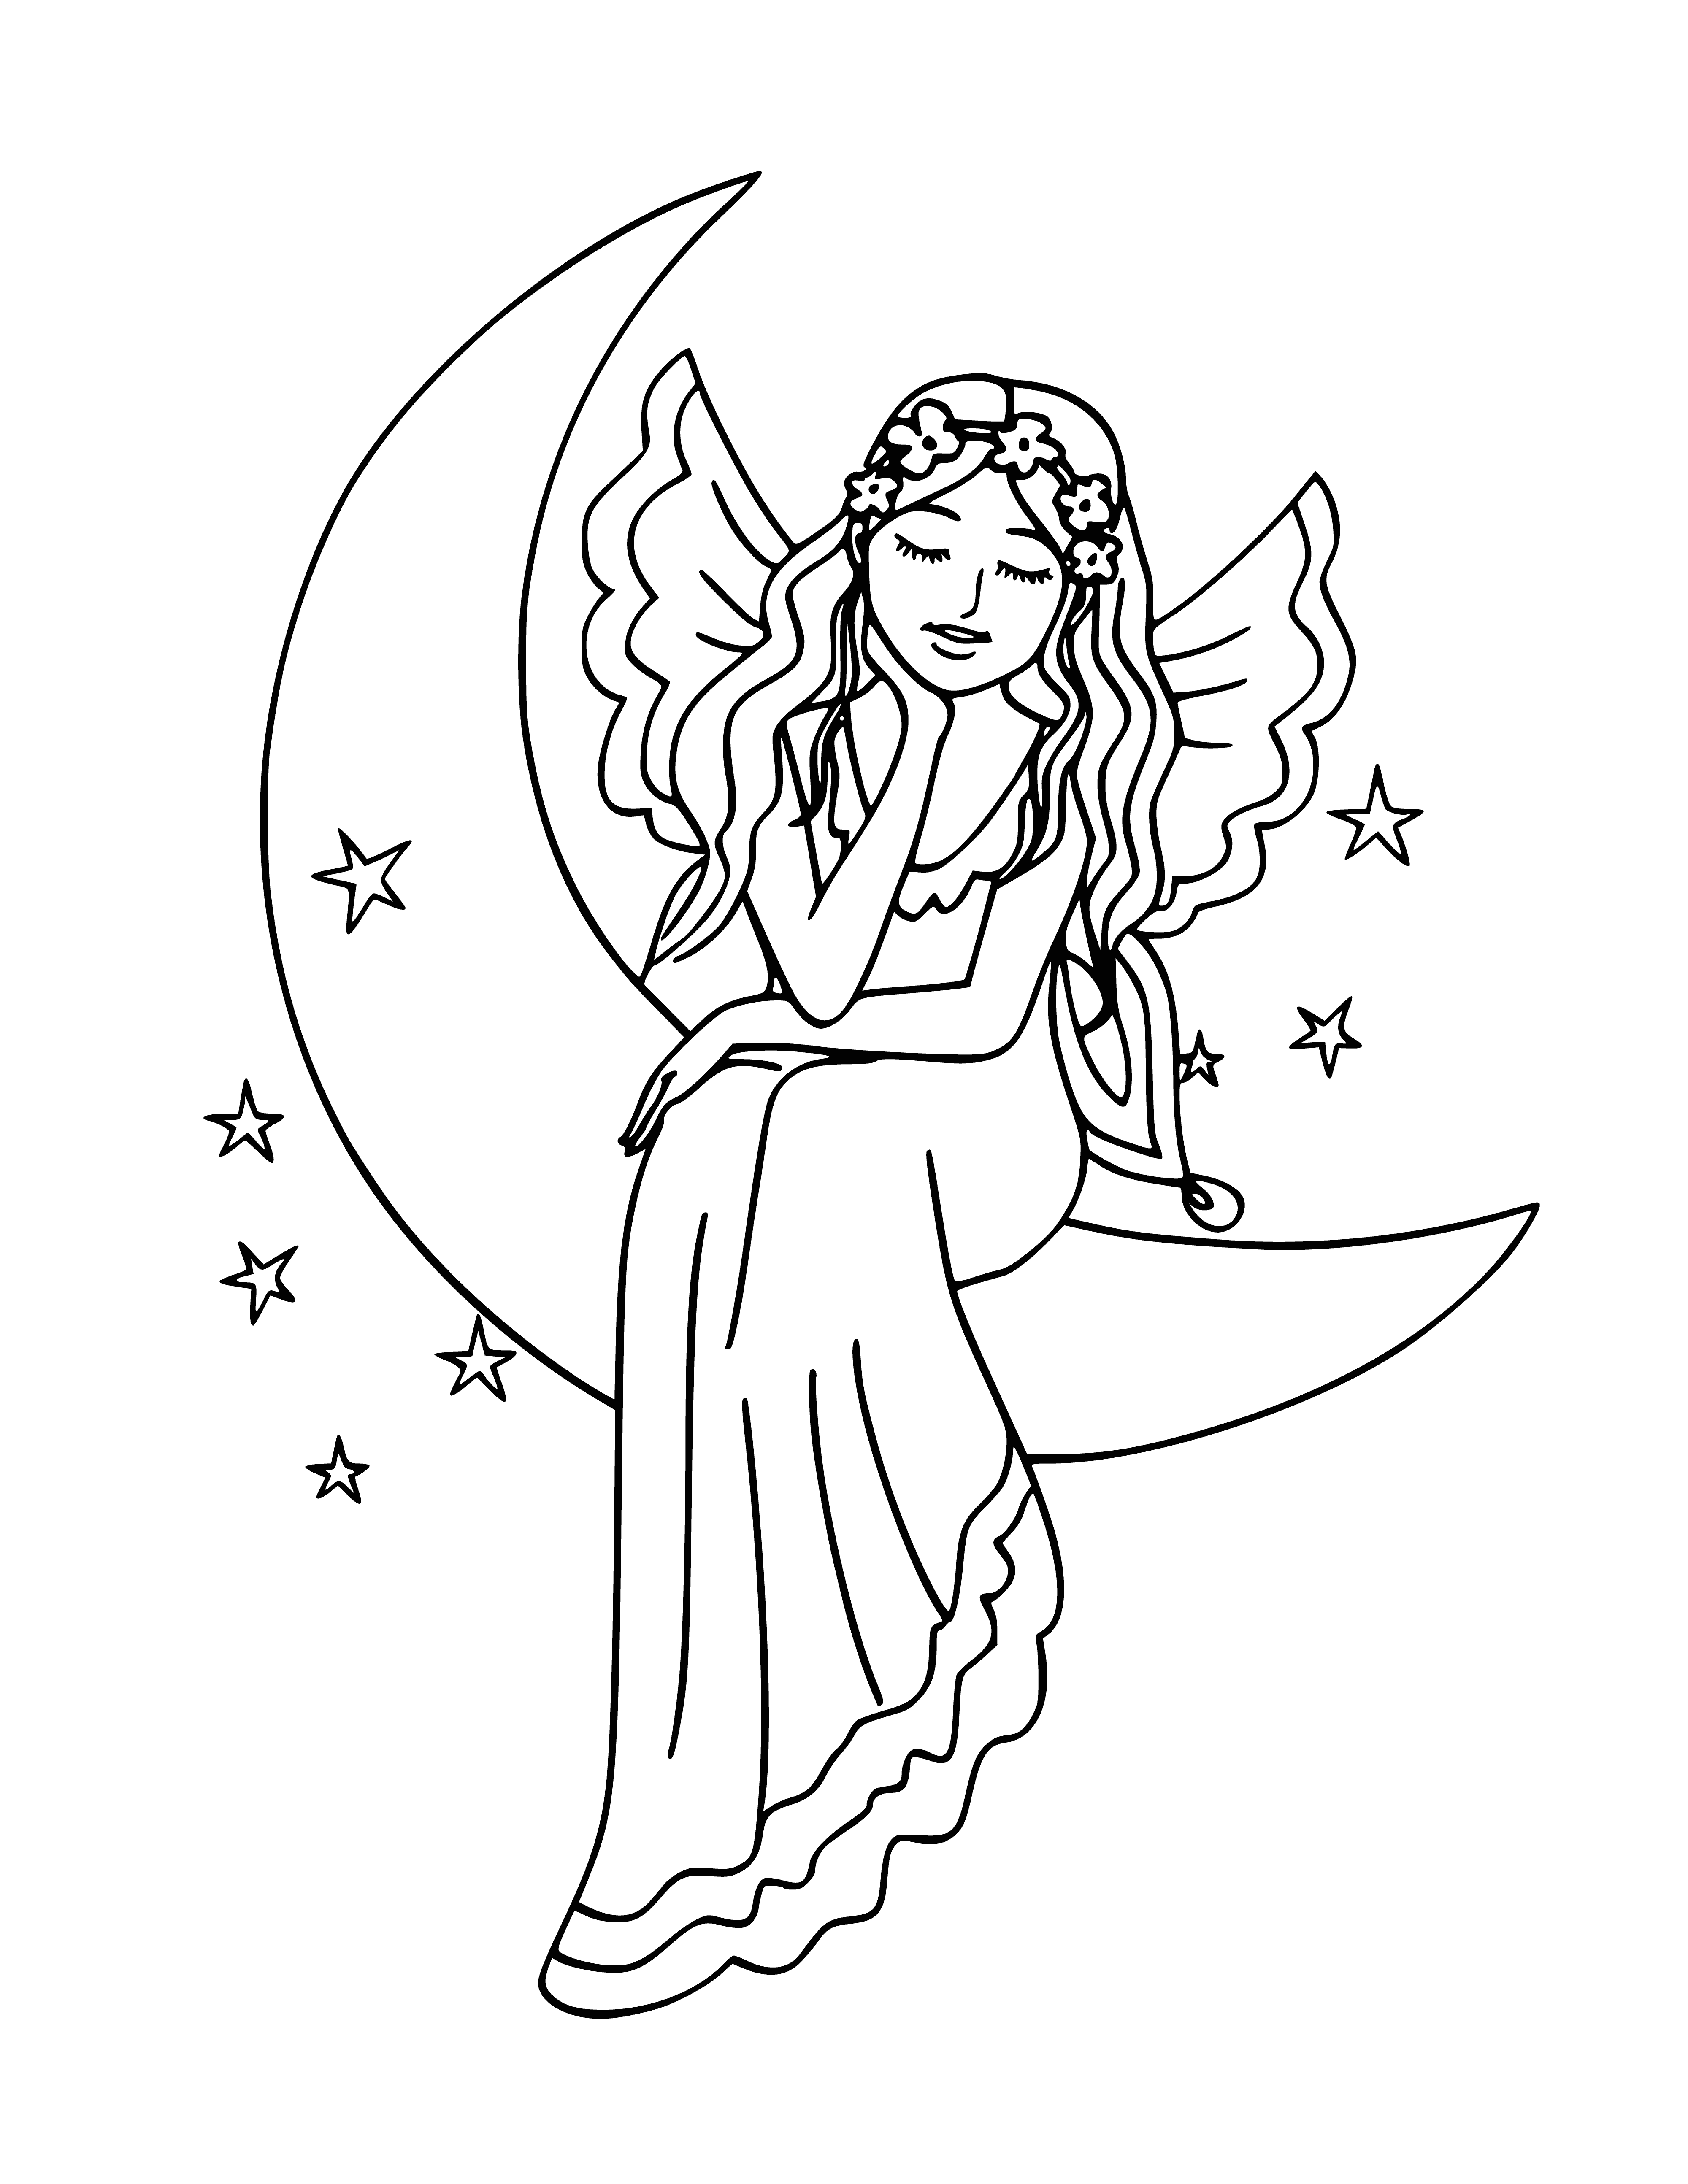 coloring page: Fairy made of dreams, gossamer wings, moonbeam dress, long hair & surrounded by sparkling light - magical! #FairyTales